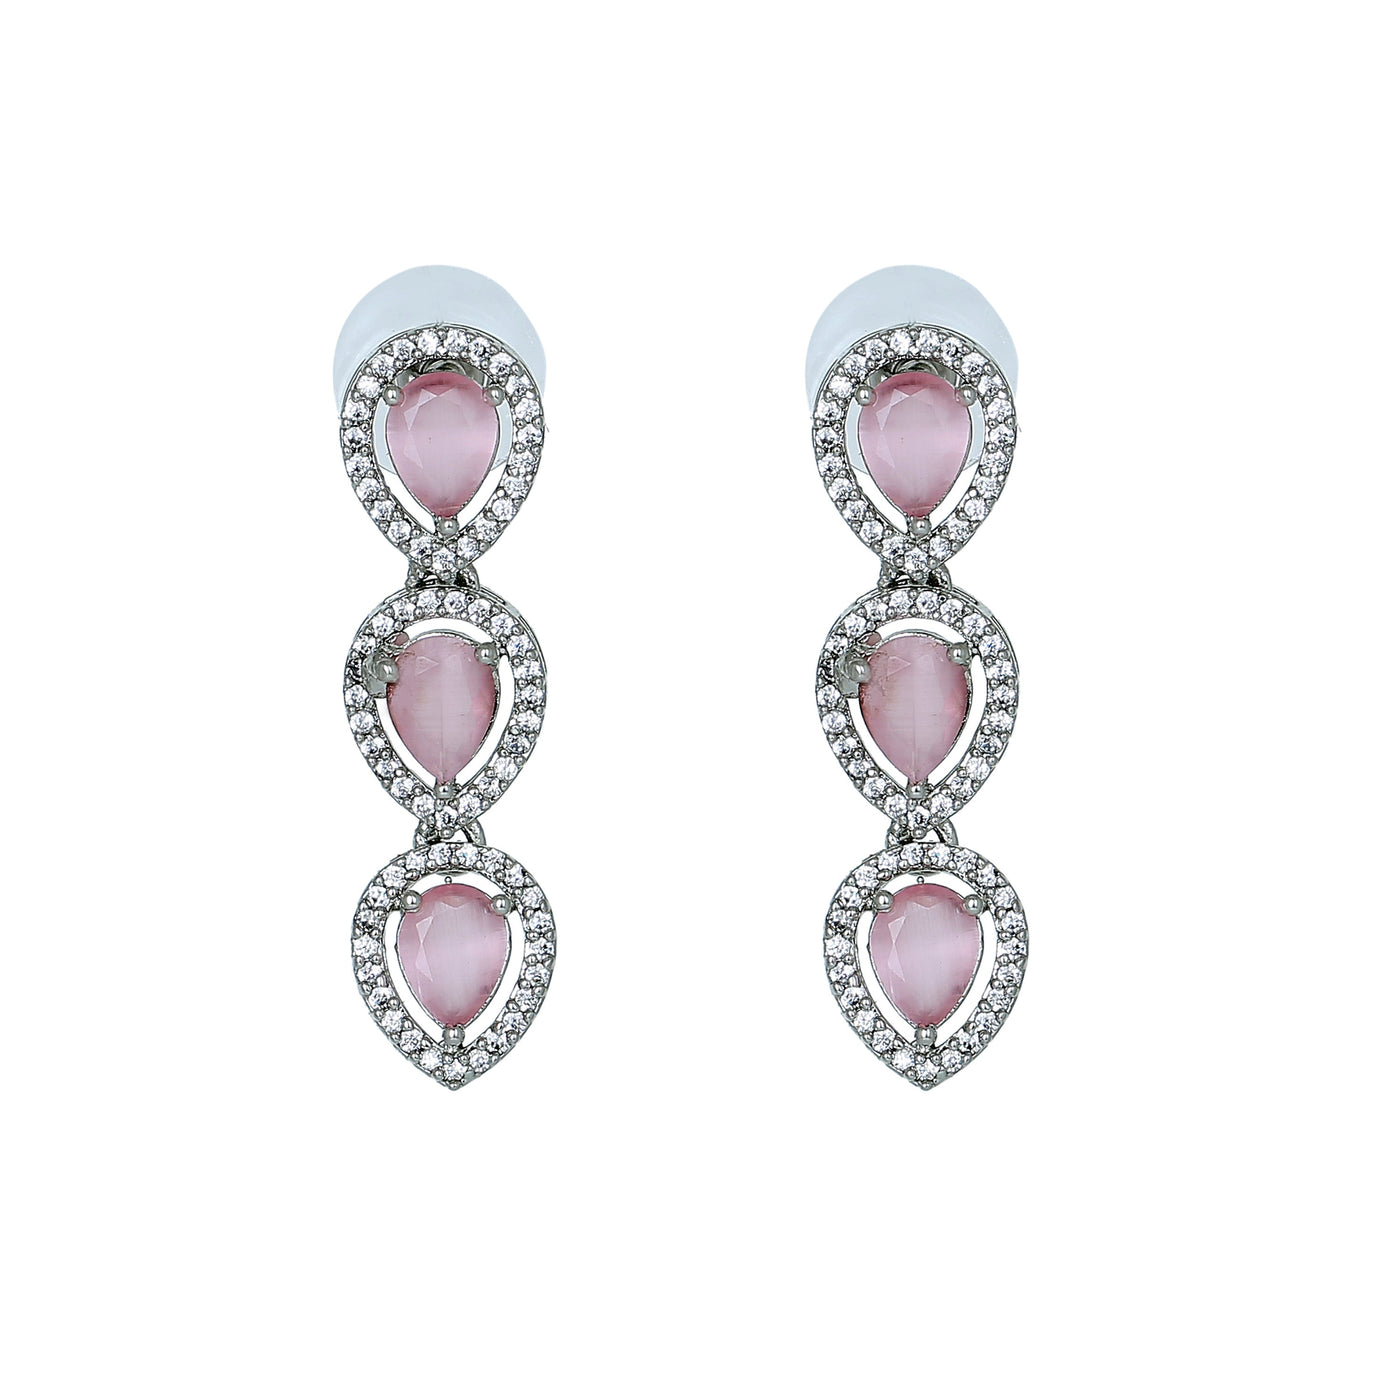 Estele Rhodium Plated CZ Precious Pears Earrings with Mint Pink Stones for Women